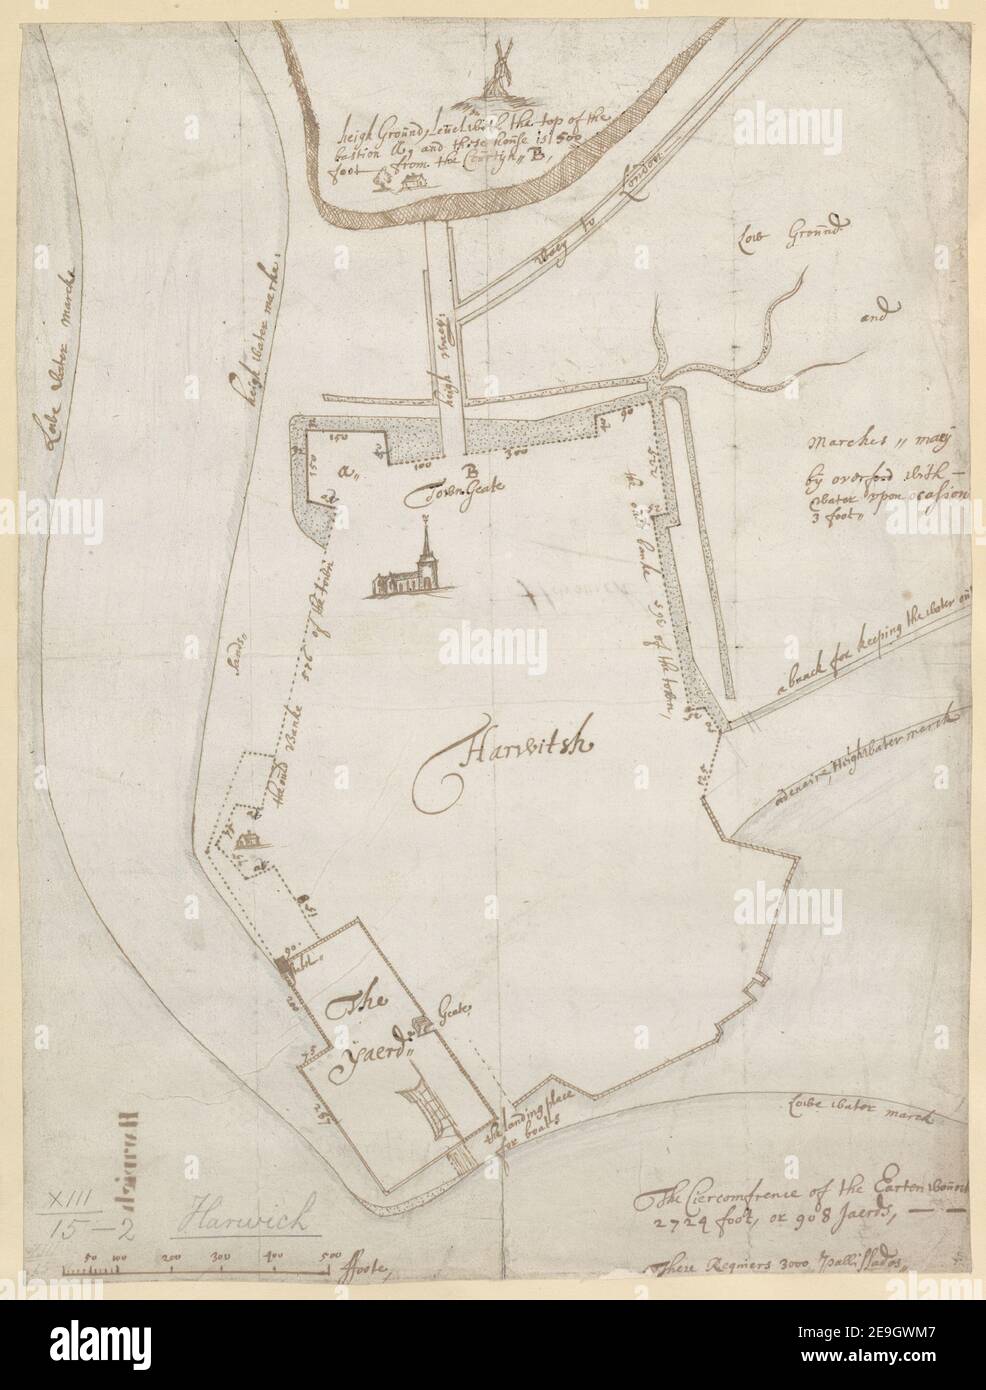 Harwitsh. Author  De Gomme, Bernard 13.15.2. Date of publication: [1680 c.]  Item type: 1 map Medium: pen and ink Dimensions: 38.6 x 29.2 cm  Former owner: George III, King of Great Britain, 1738-1820 Stock Photo